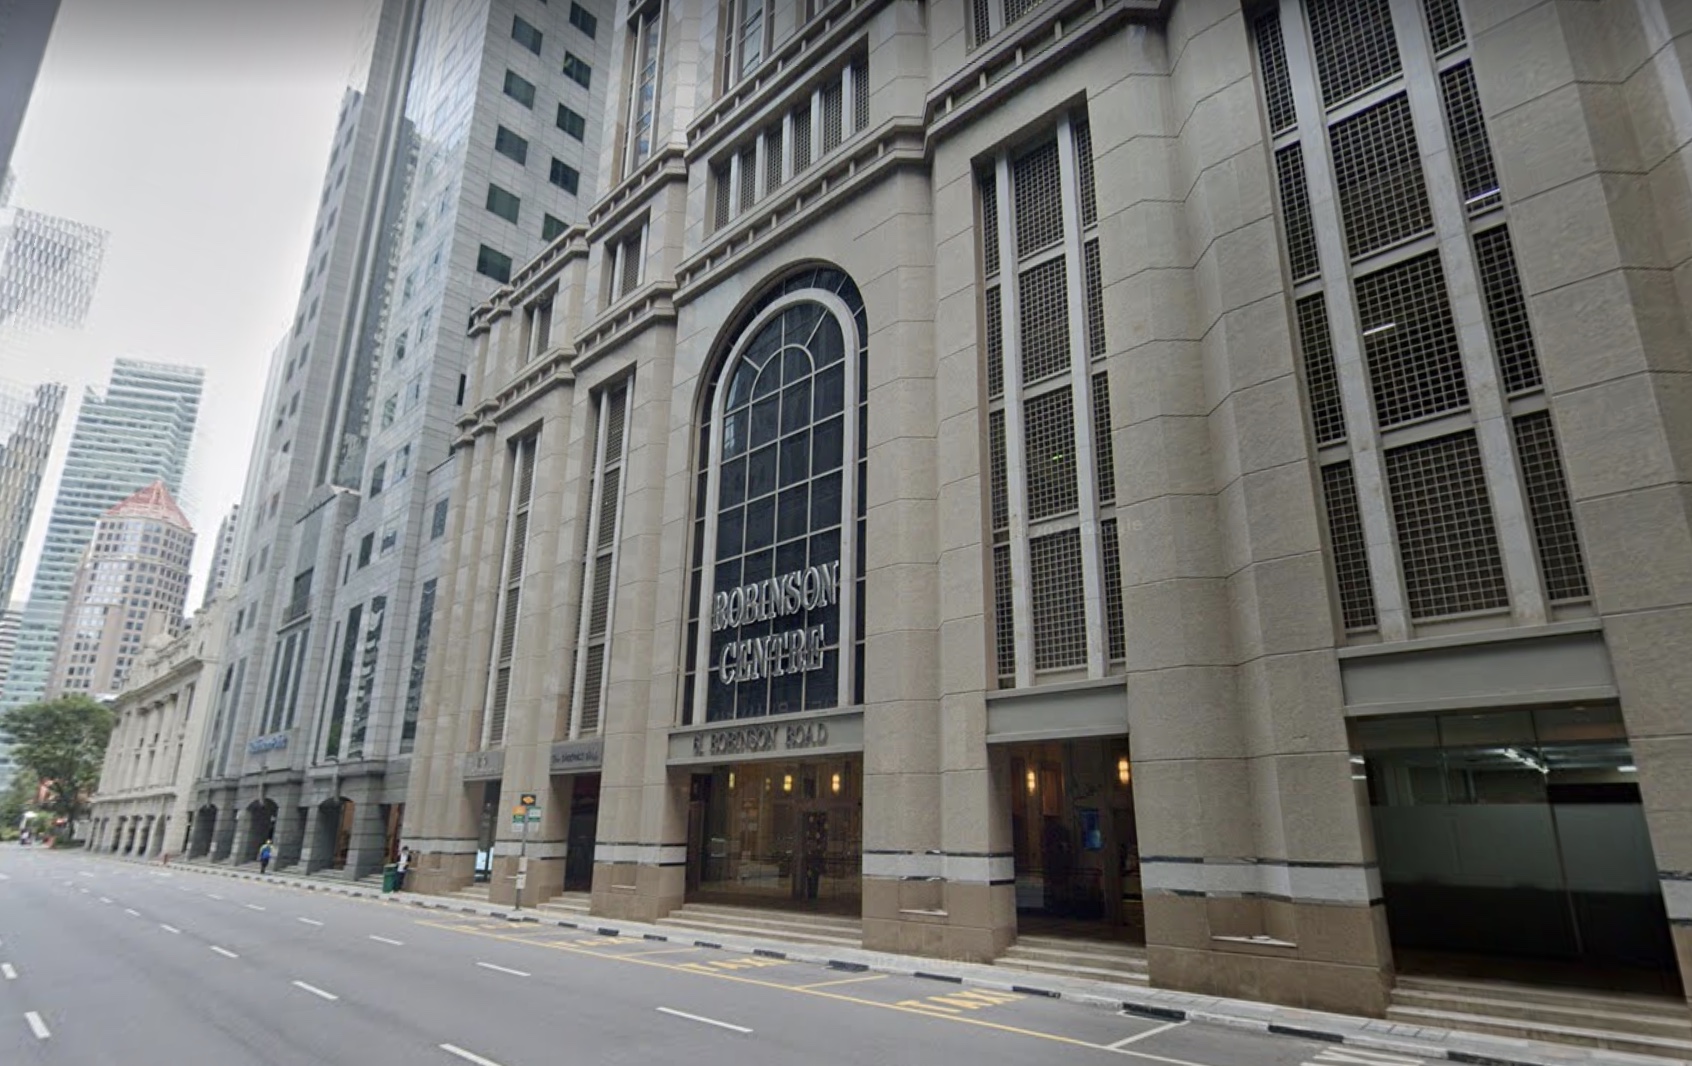 61 Robinson Road, where AsiaCiti Trust’s Singapore office is located. Image: Google